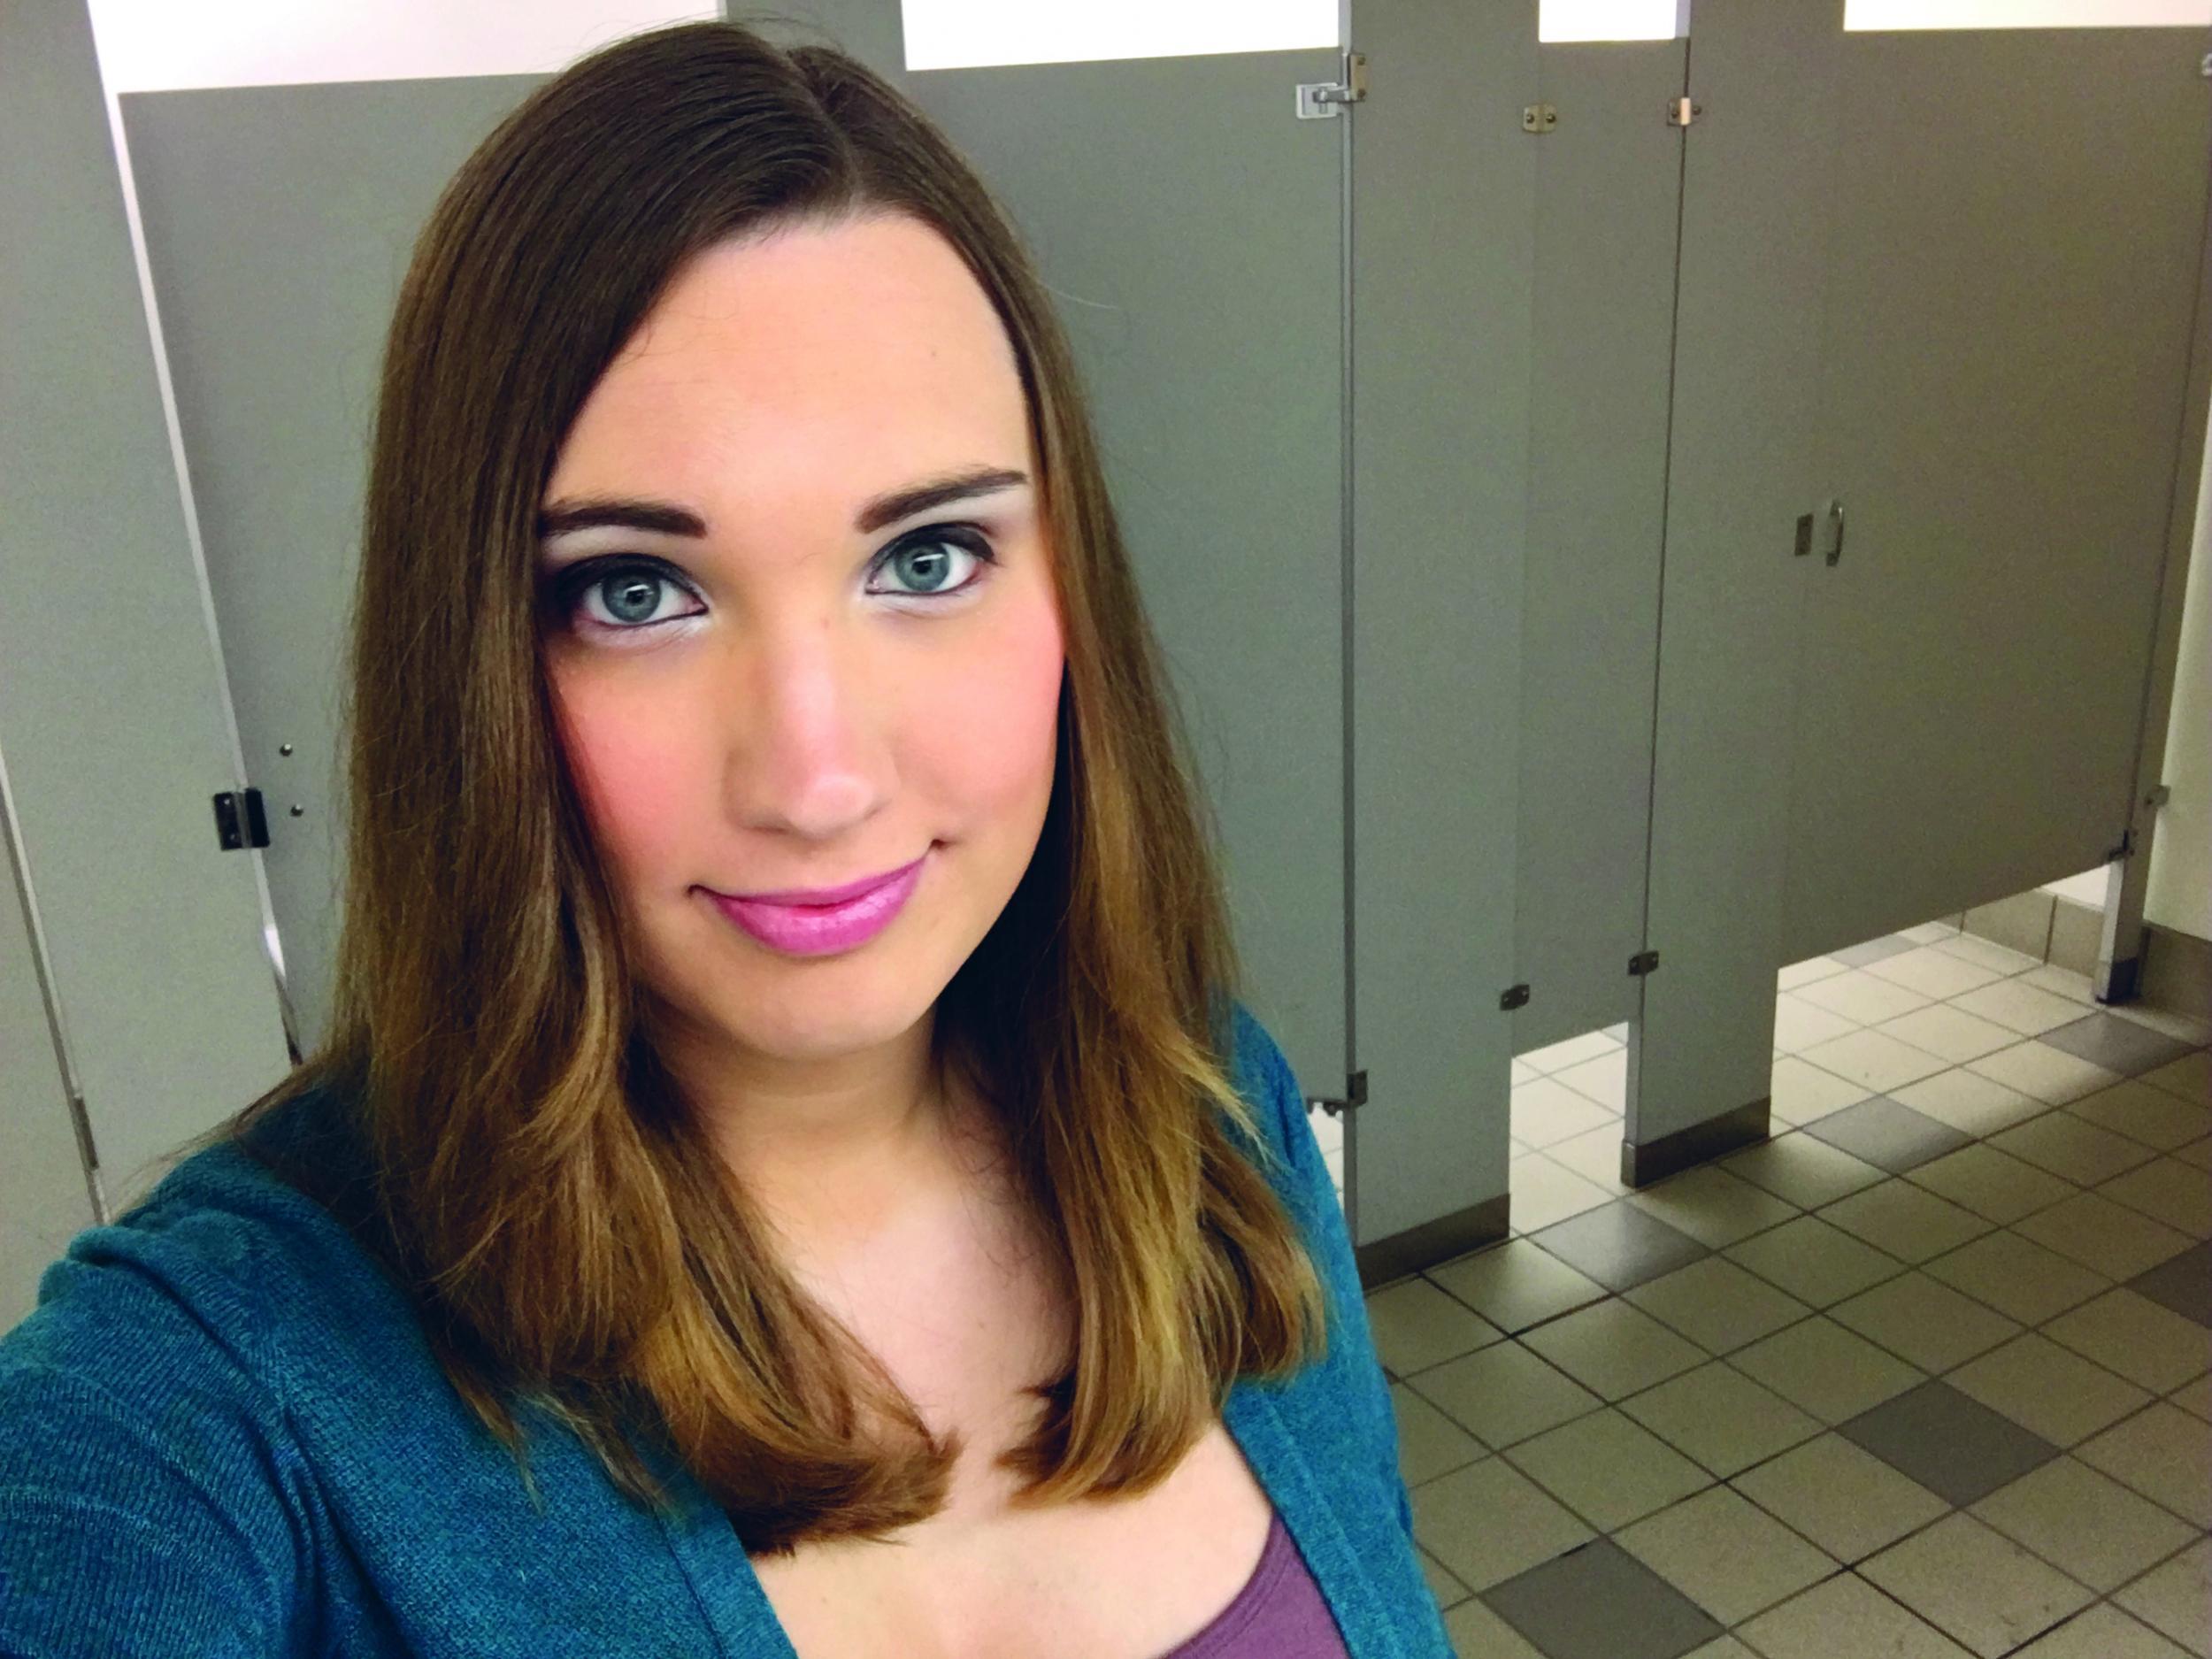 Sarah McBride posted this defiant selfie after North Carolina passed a bill making it illegal for her to enter a women's bathroom